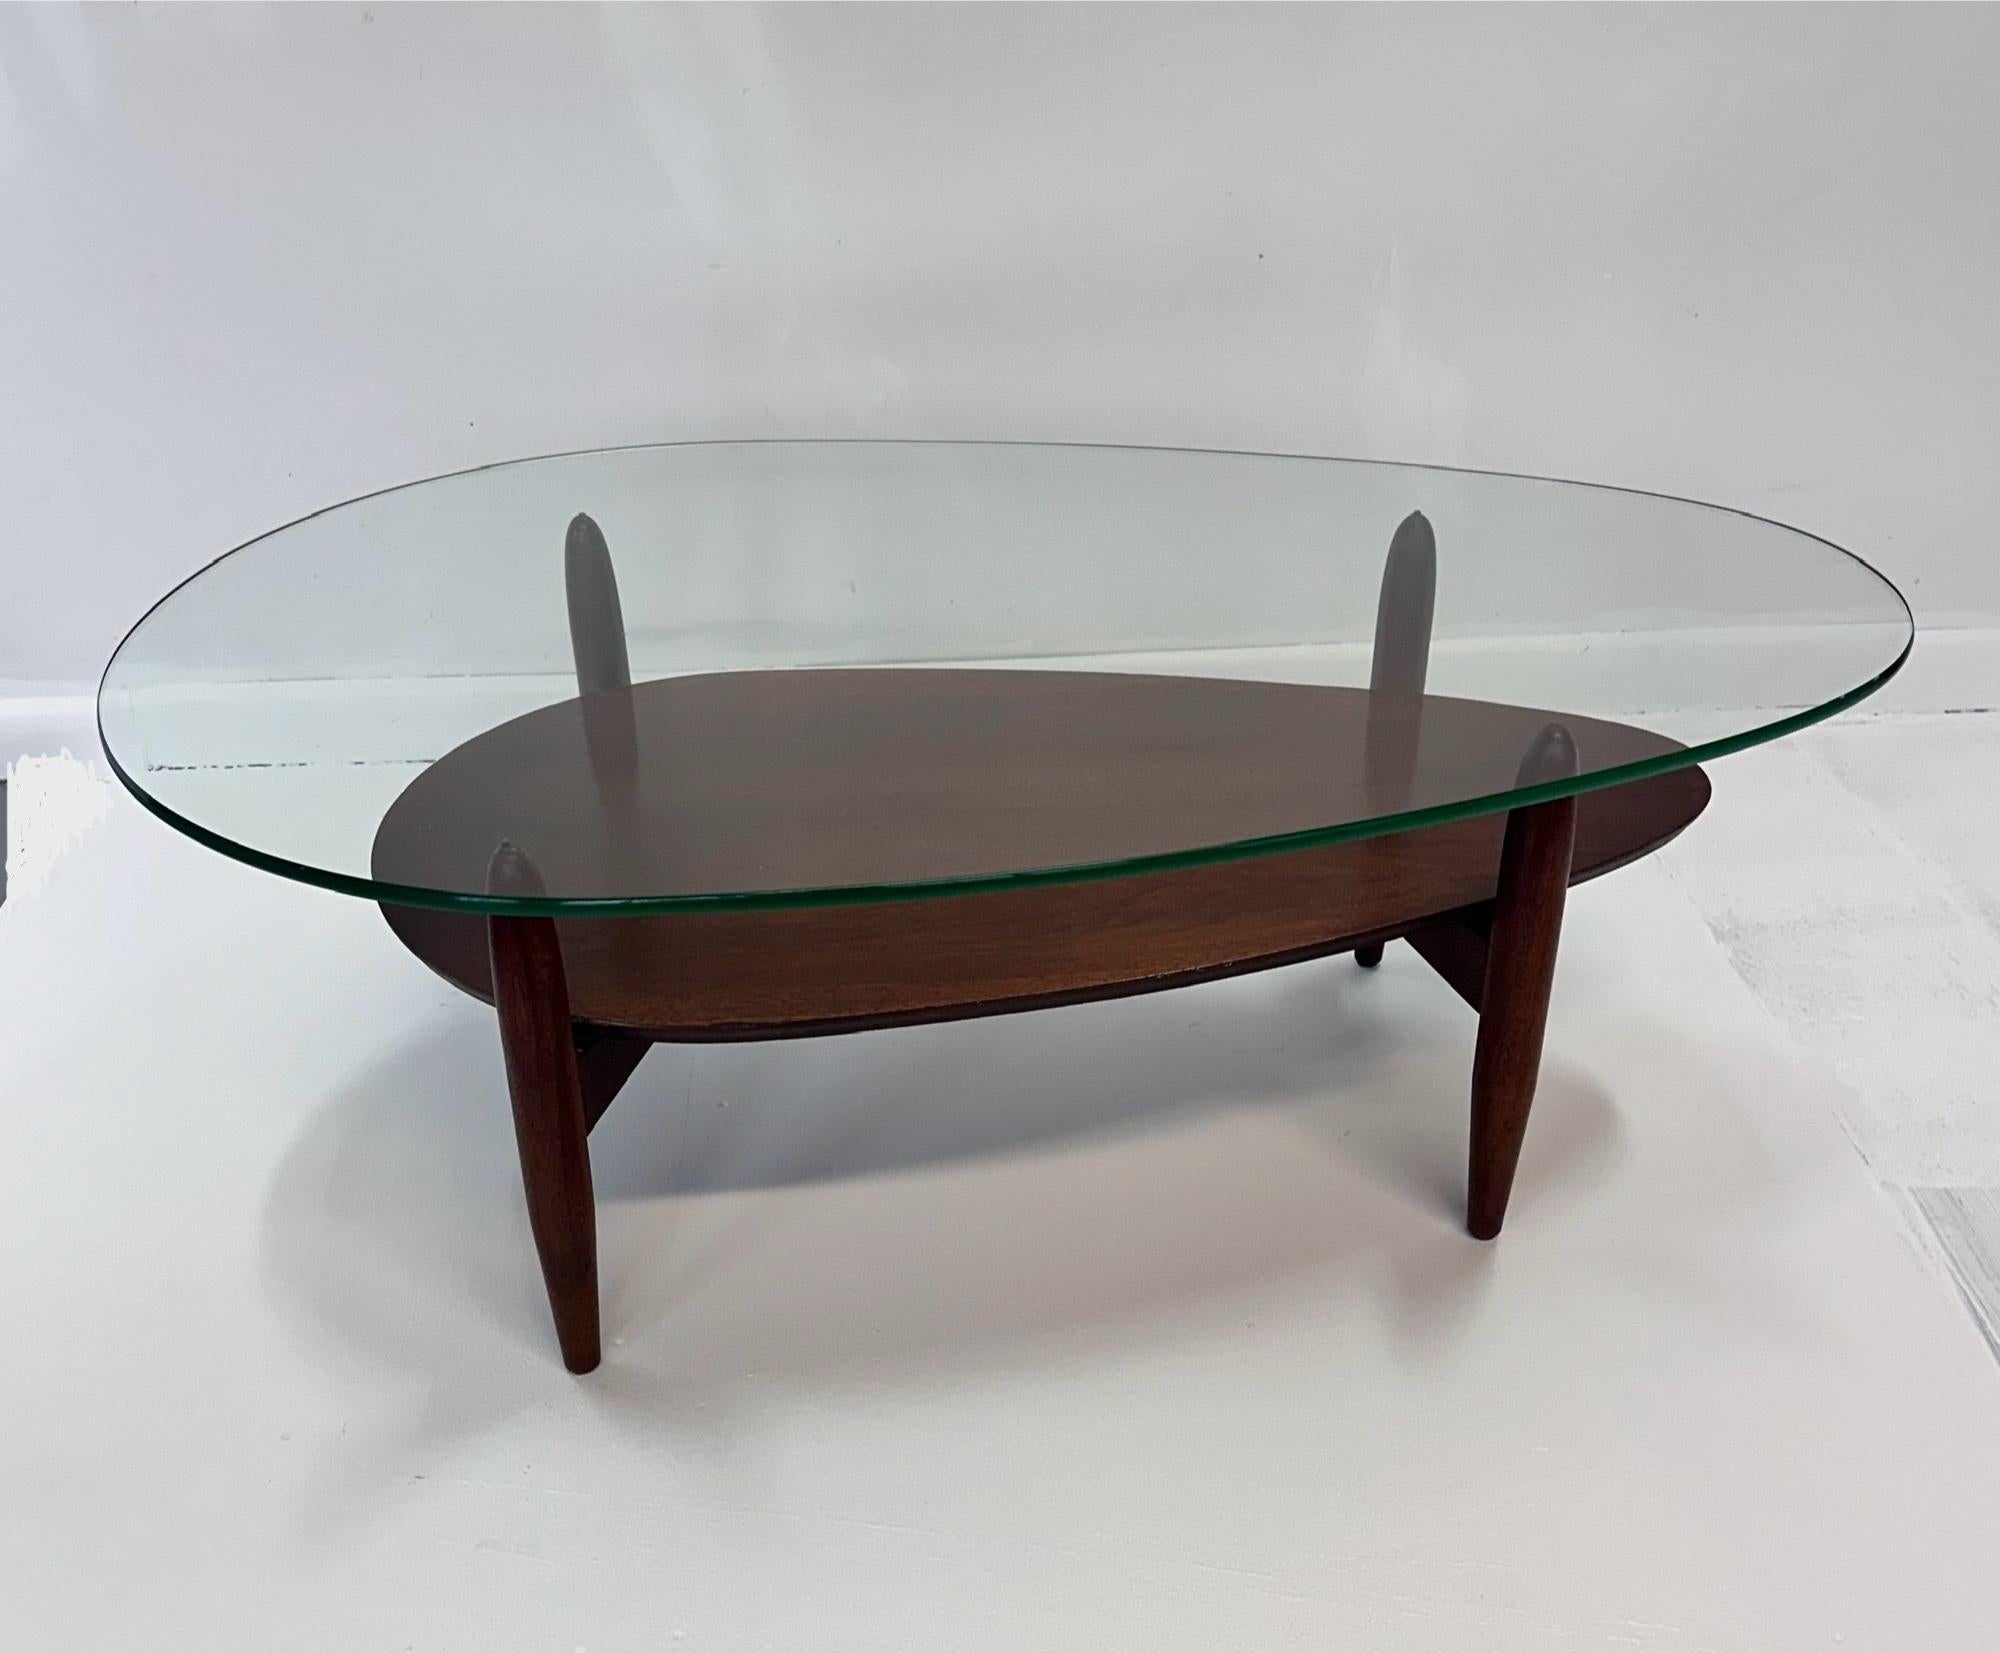 A rare and coveted design by Adrian Pearsall for Craft Associates, the R1917-TGT teardrop table. Found in walnut with what looks like the original glass top although not the planter glass, this glass top has age and looks to be the same manufacture